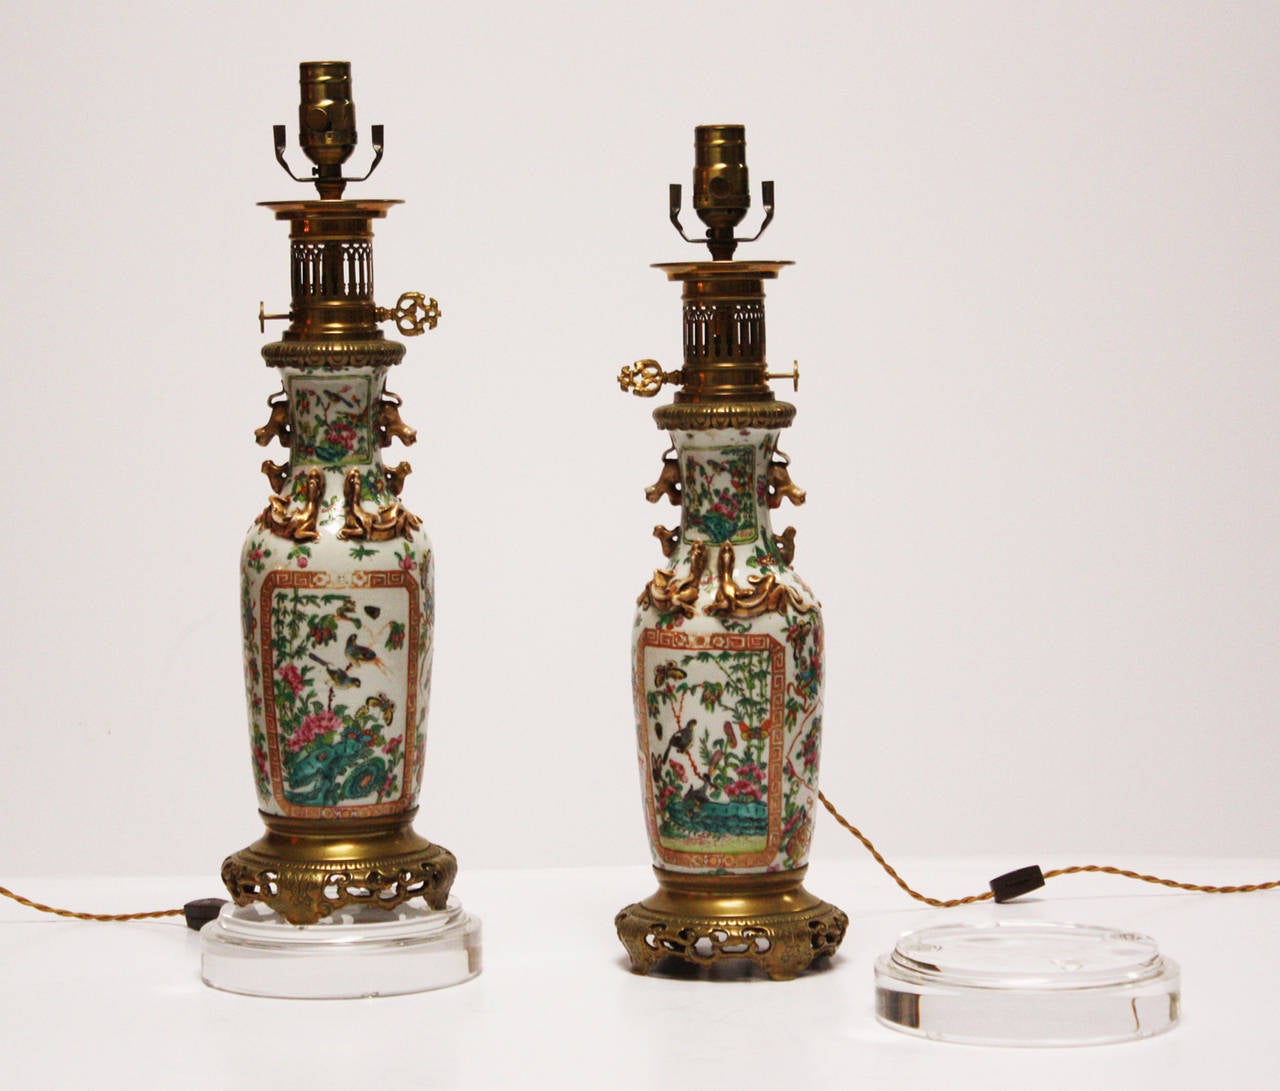 Pair of 19th century Chinese export rose medallion vases converted to 19th century French oil lamps with bronze mounts. The former oil lamps are now wired for electricity and rest on top of custom Lucite bases. The vases are beautifully painted with